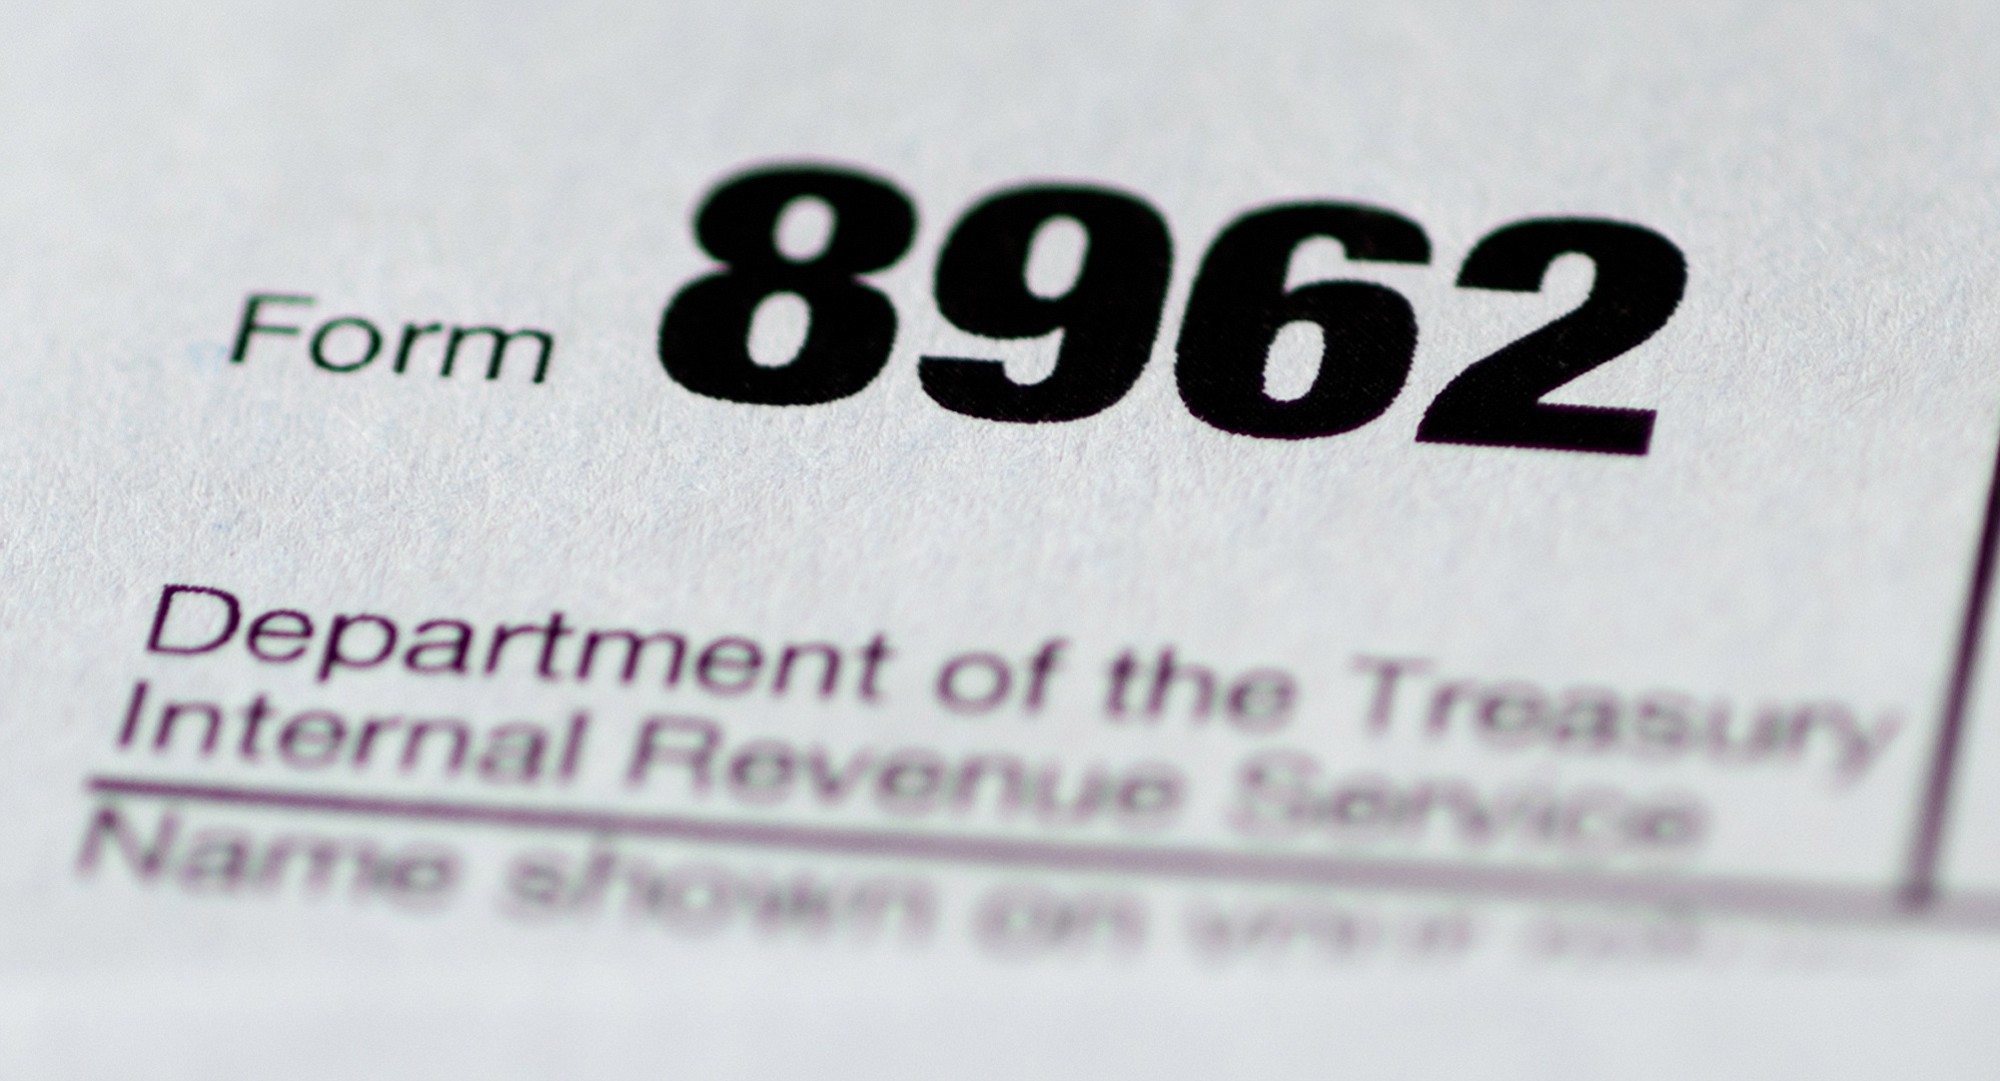 A health care tax forms 8962 is seen in Washington.